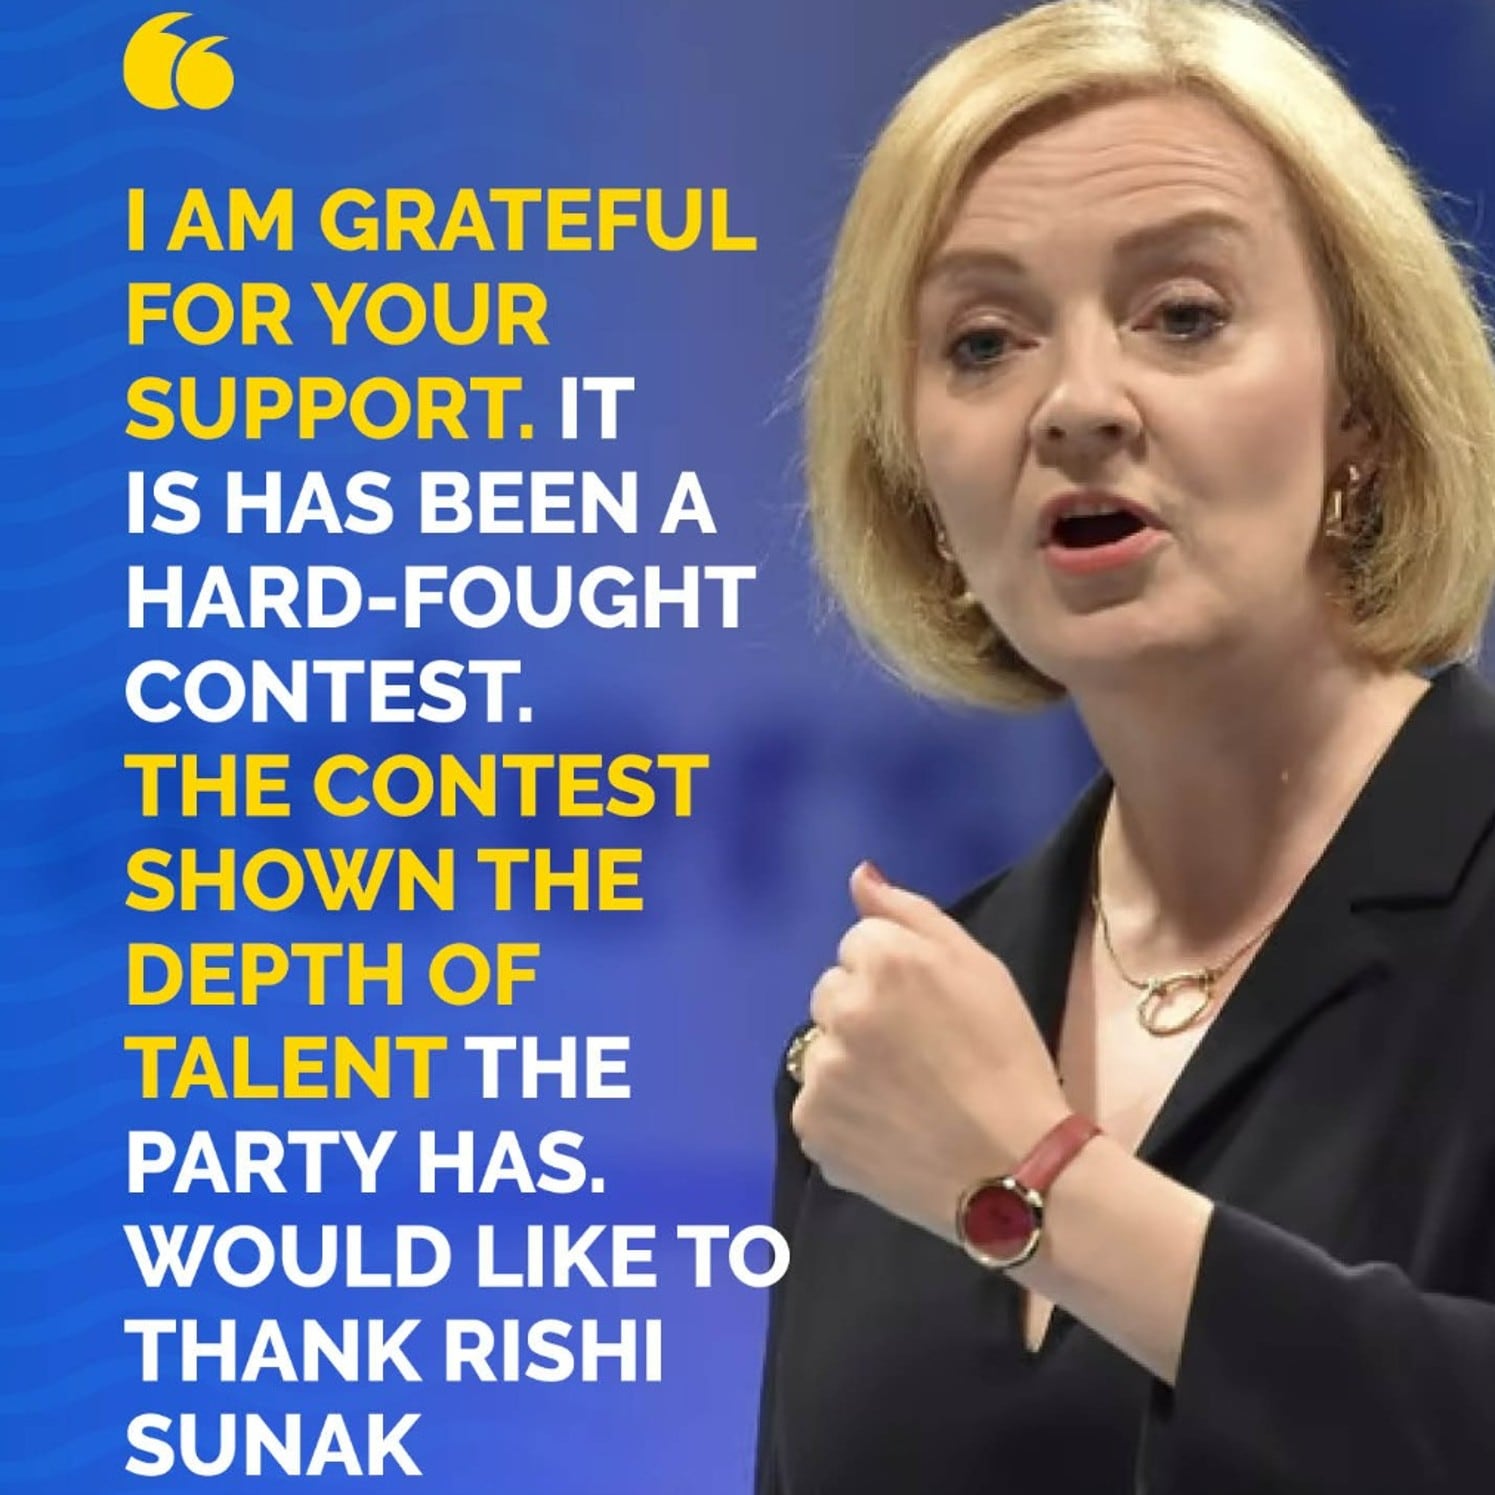 Liz Truss, The New PM of UK, Studied from Oxford University